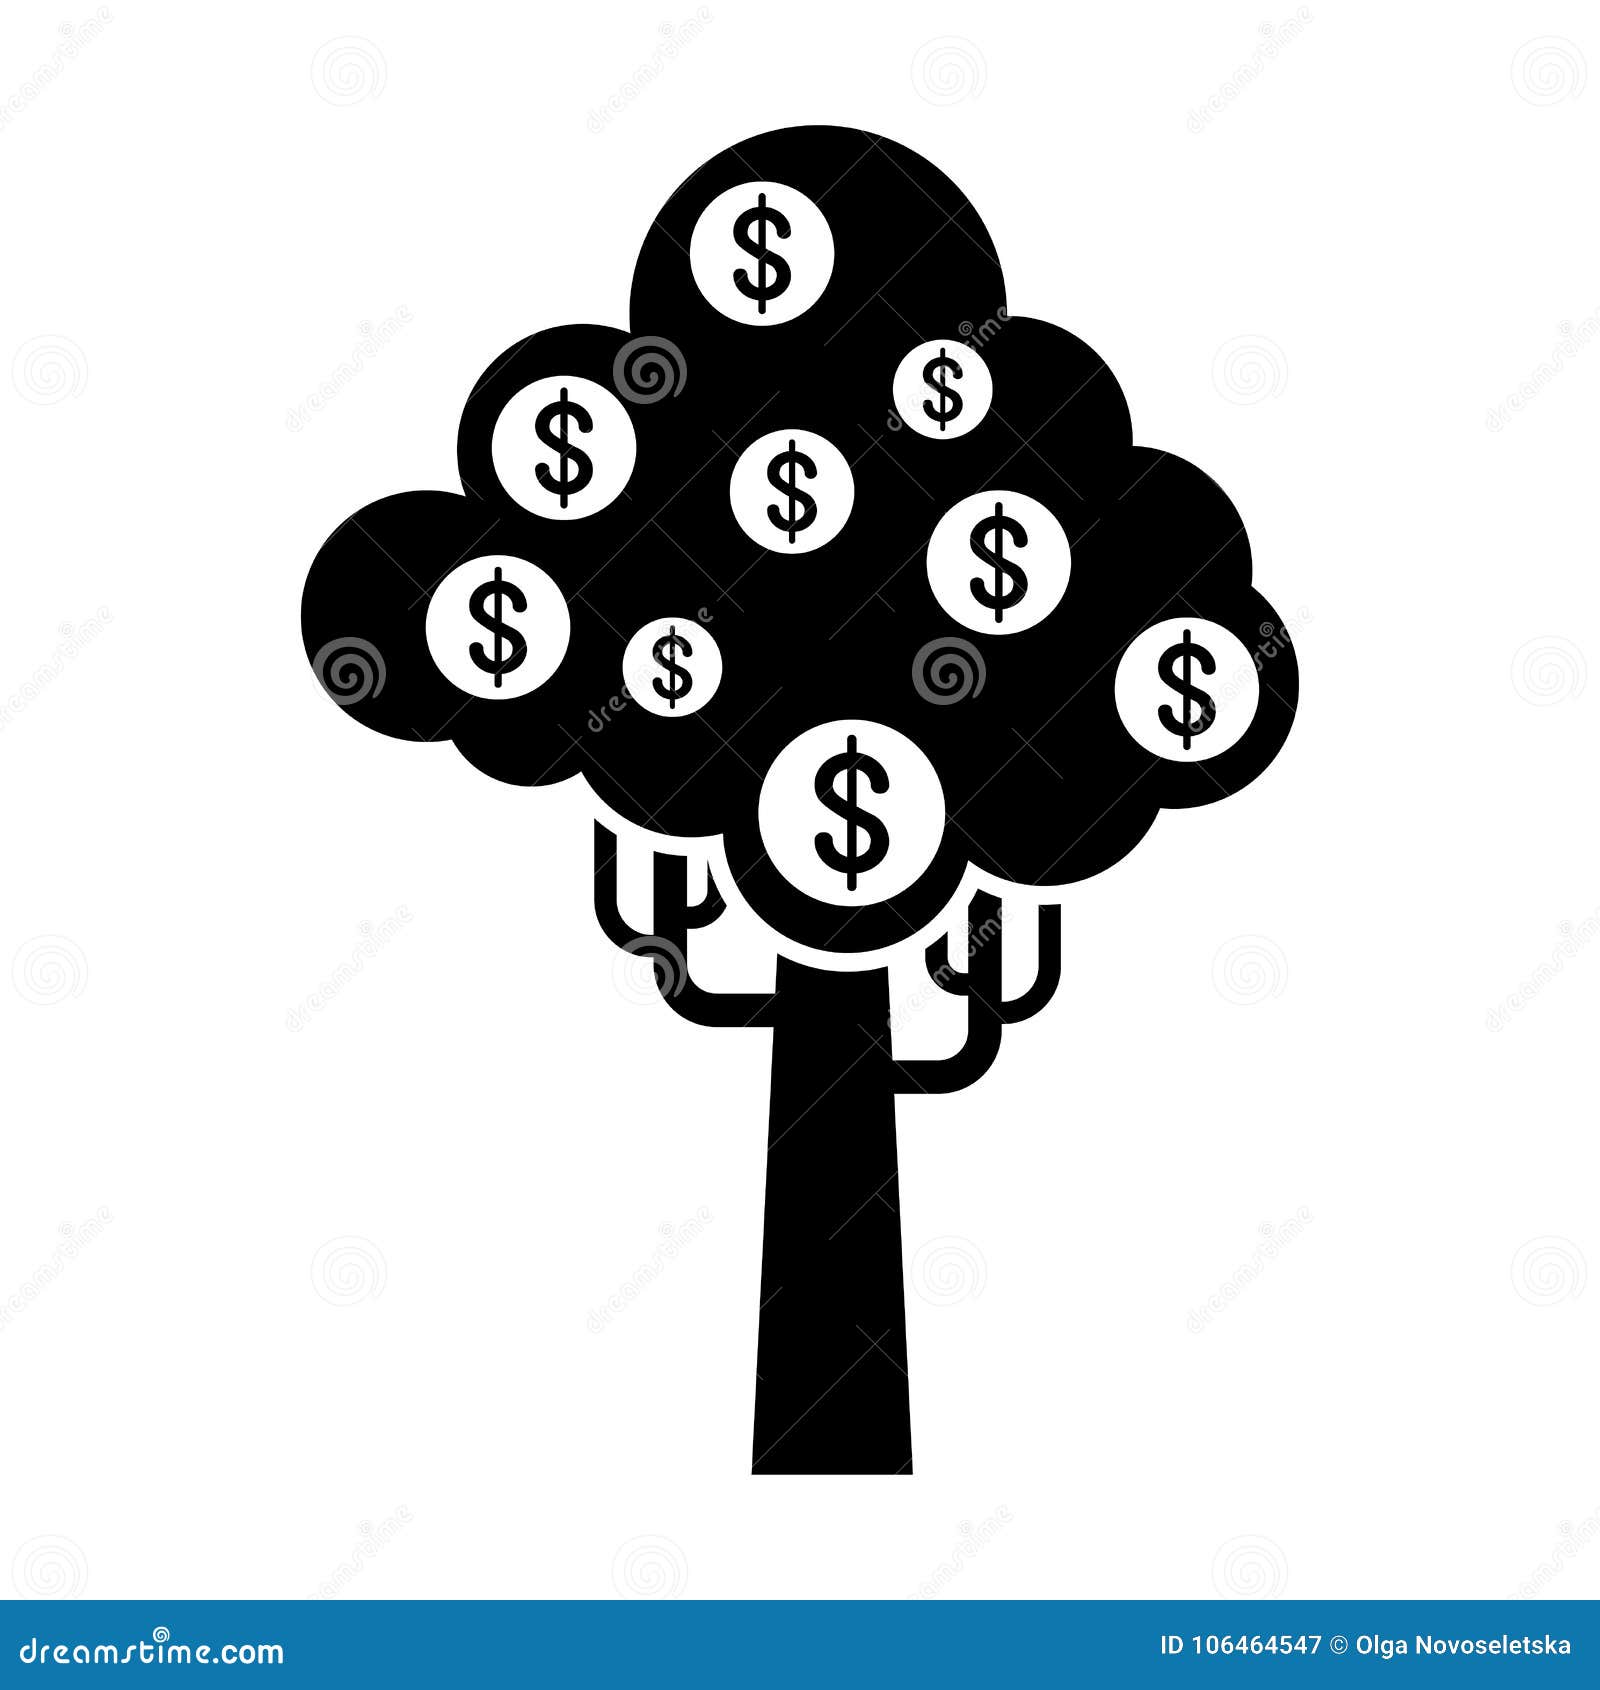 Money Tree Black Icon Stock Vector Illustration Of Bright 106464547 - royalty free vector money tree black icon download preview